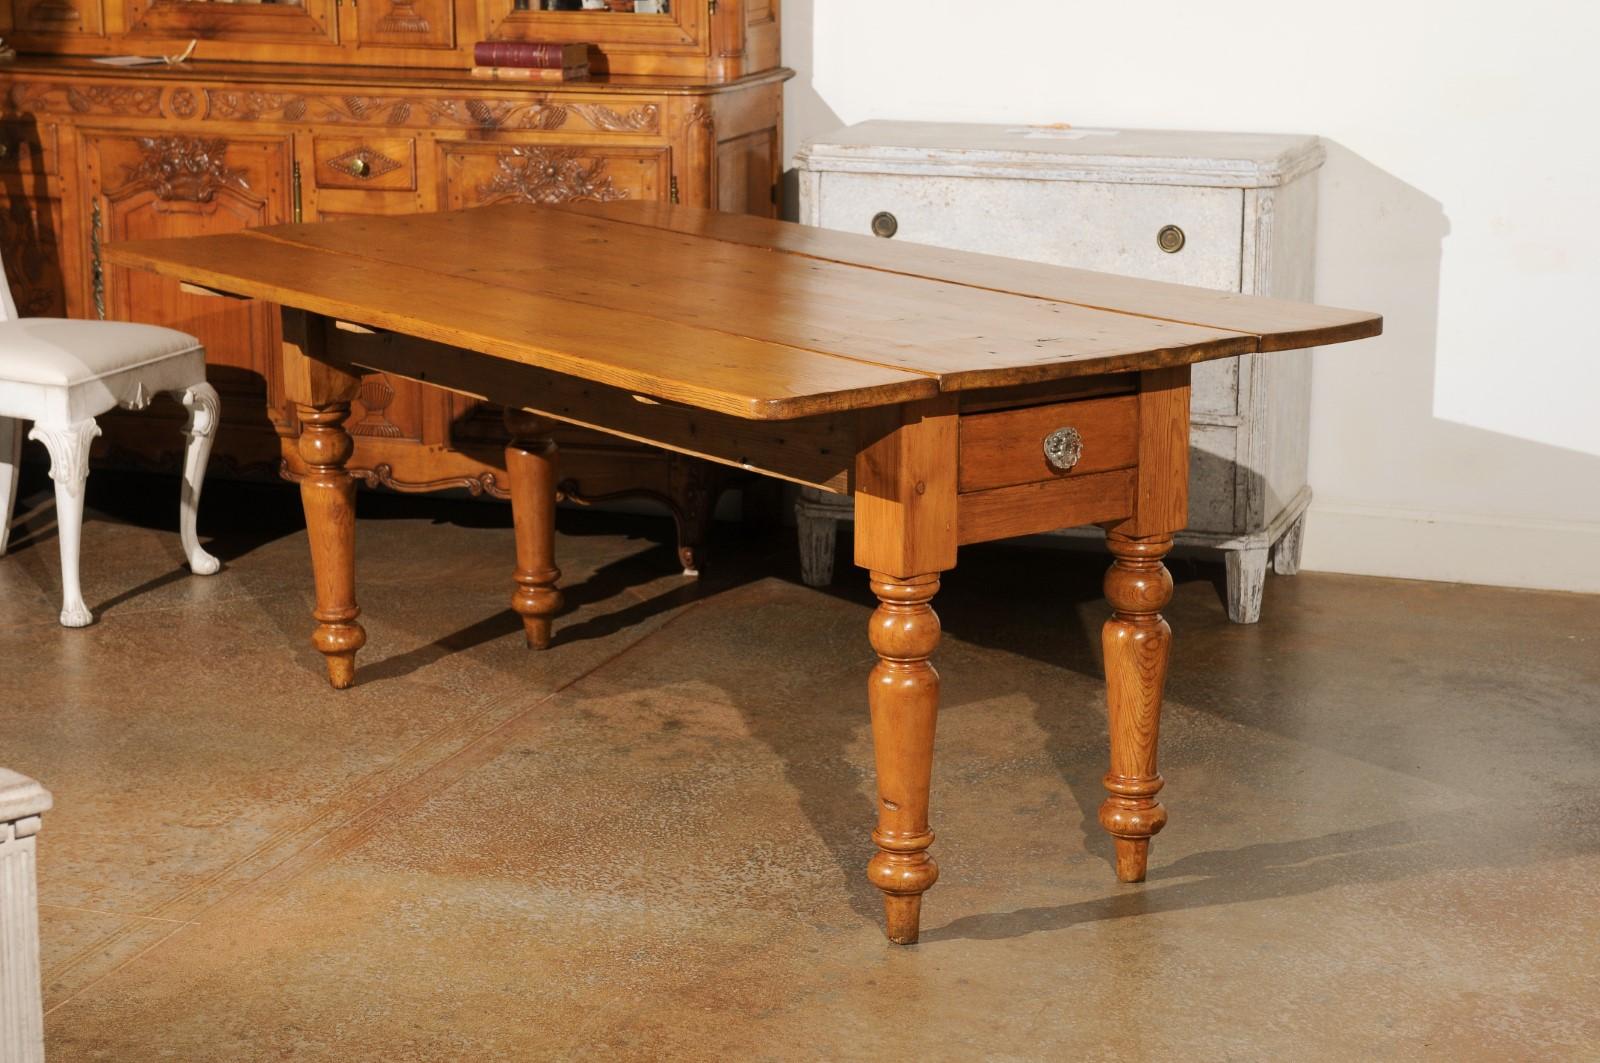 An English pine drop leaf farm table from the late 19th century, with lateral drawers and turned legs. Created in England during the third quarter of 19th century, this farm table features a rectangular top flanked with two drop leaves, measuring